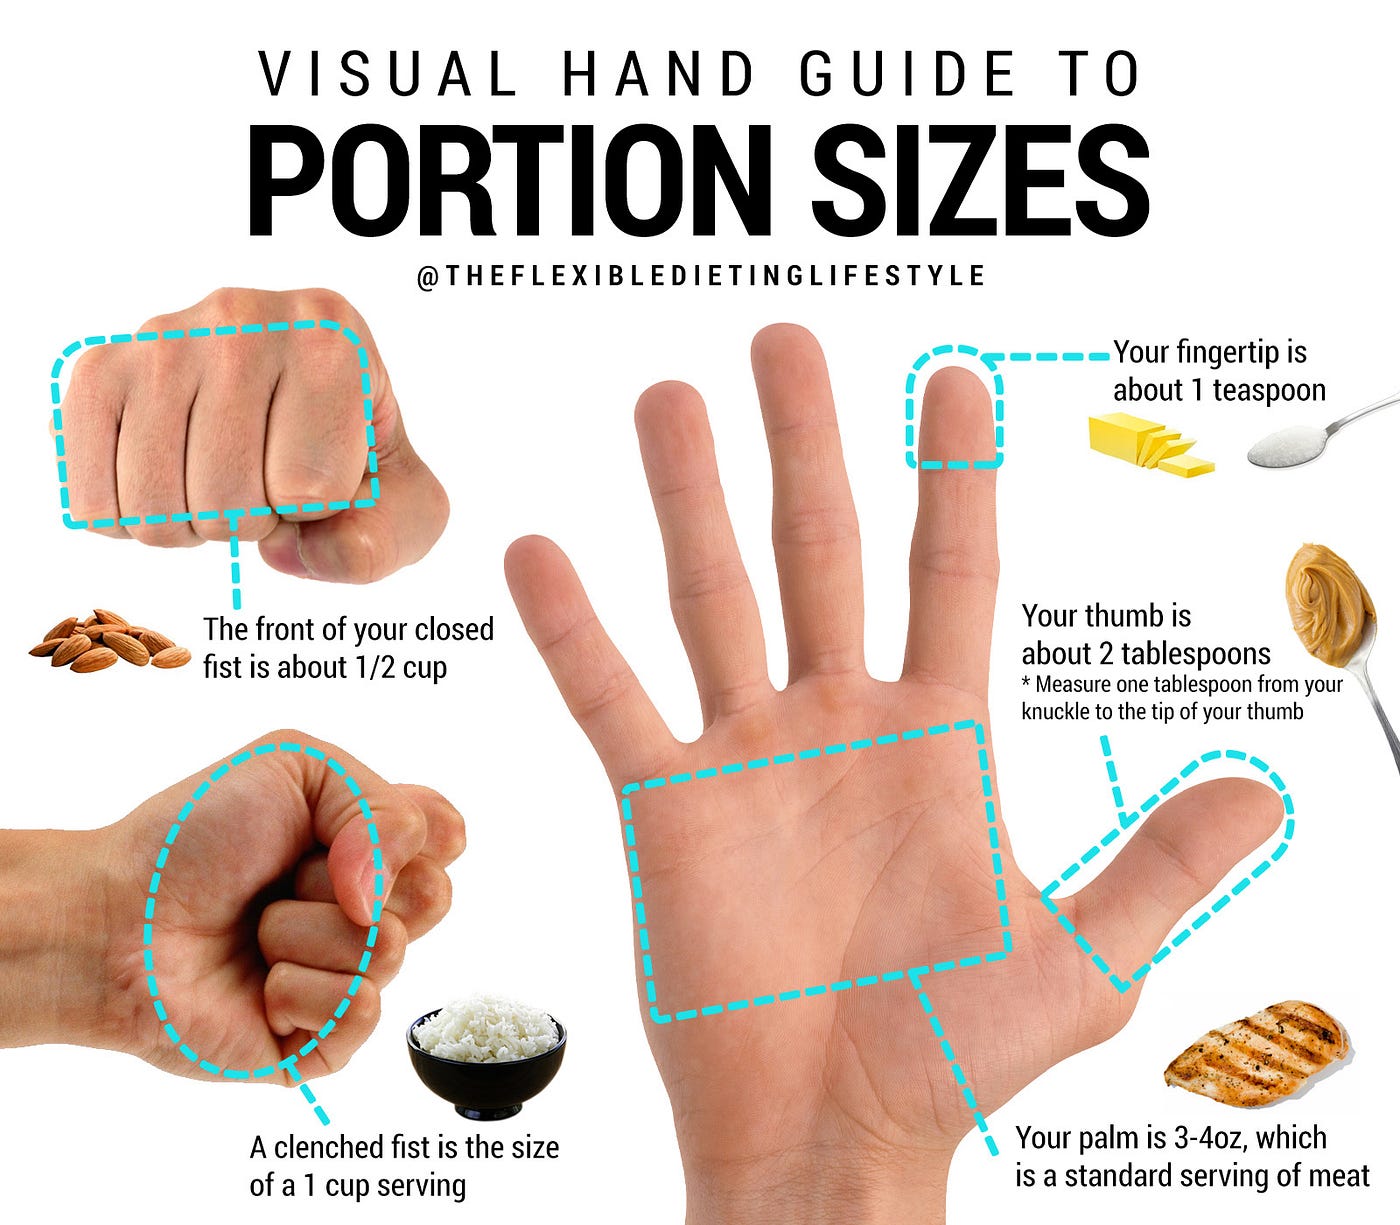 Visual Hand Guide to Portion Sizes, by Zach Rocheleau